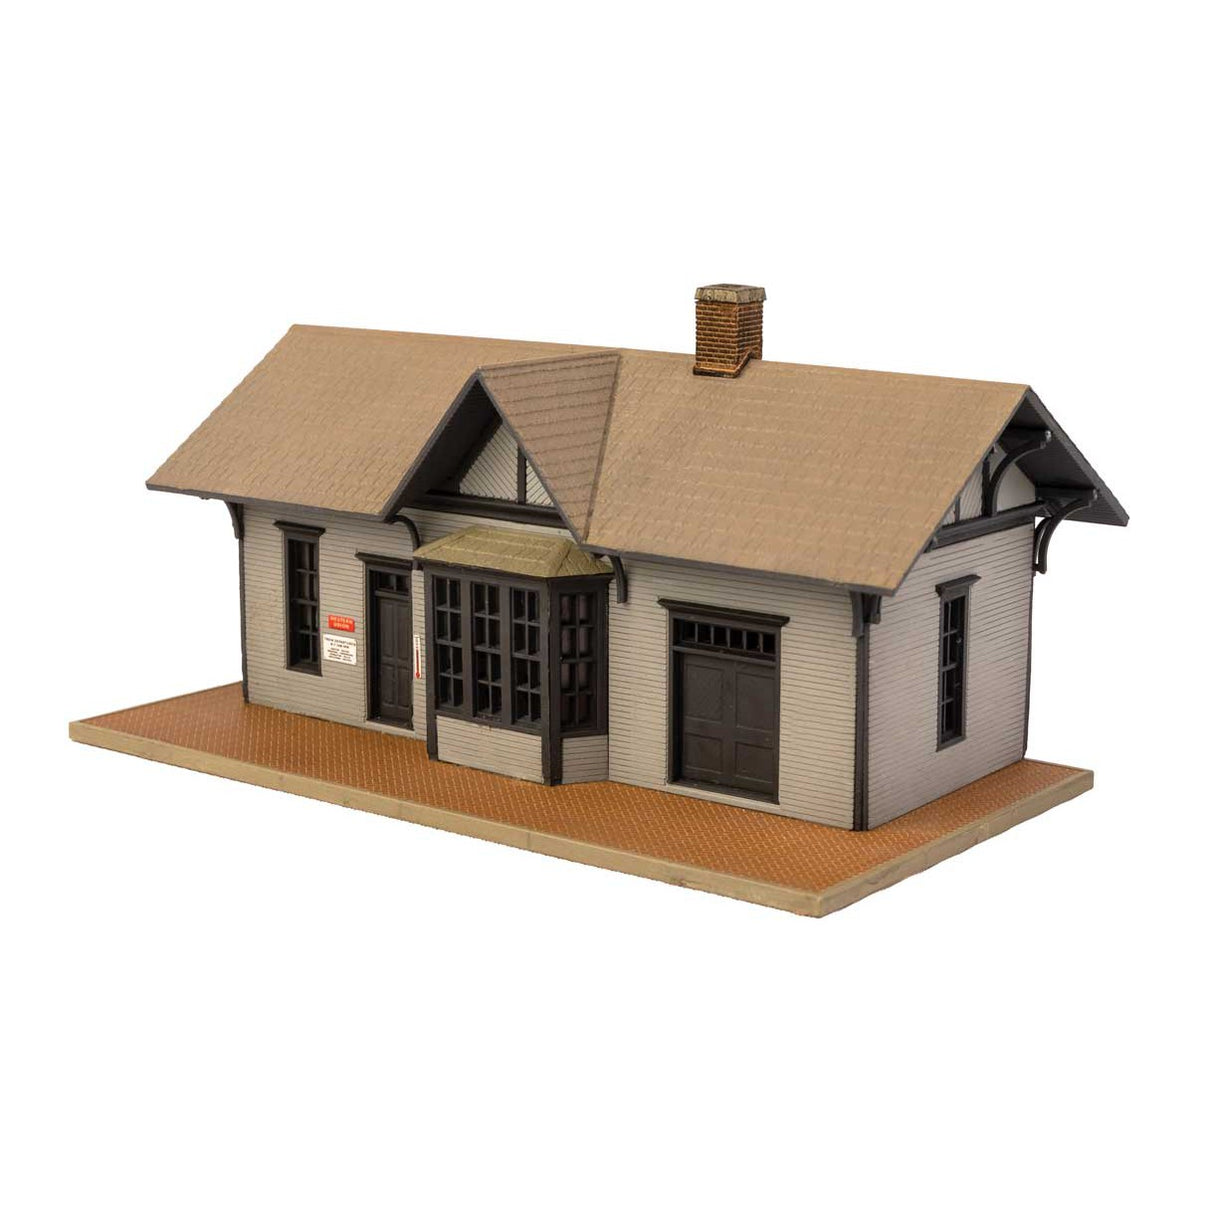 Walthers Cornerstone N Scale Golden Valley Depot Kit